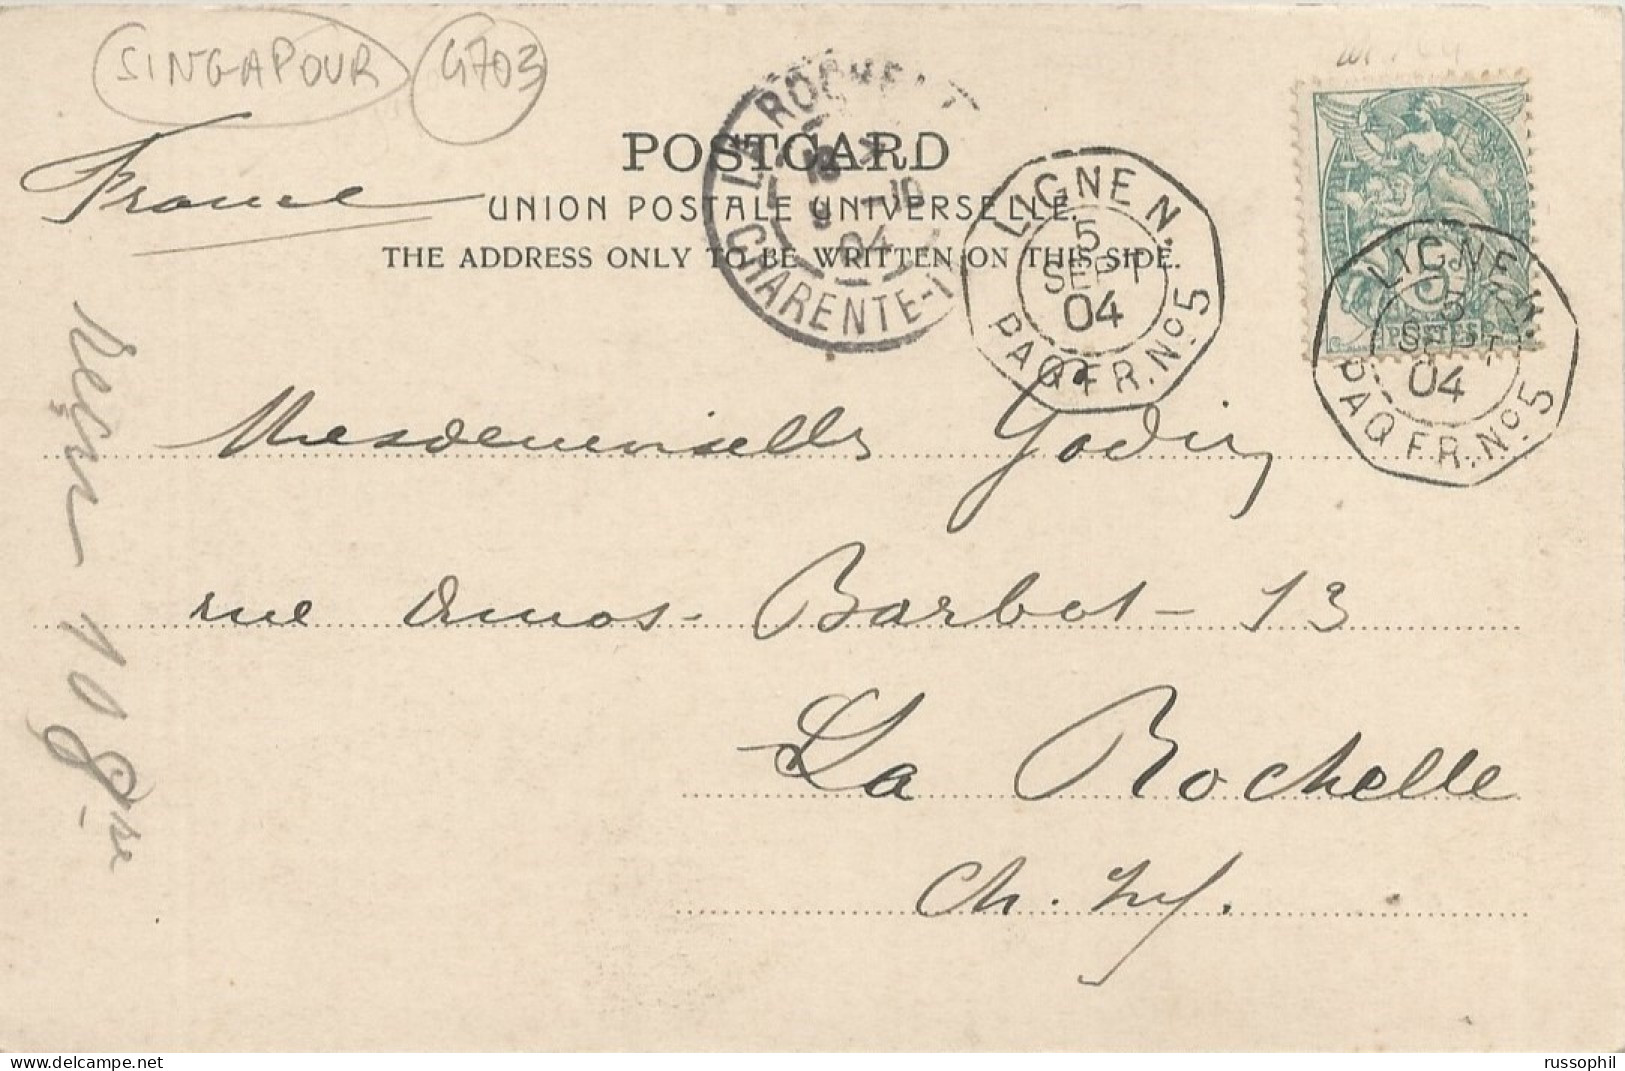 FRANCE - SEA POST- "LIGNE N" DEPARTURE PMK ON FRANKED PC (VIEW OF SINGAPORE) TO FRANCE - 1904 - Poste Maritime